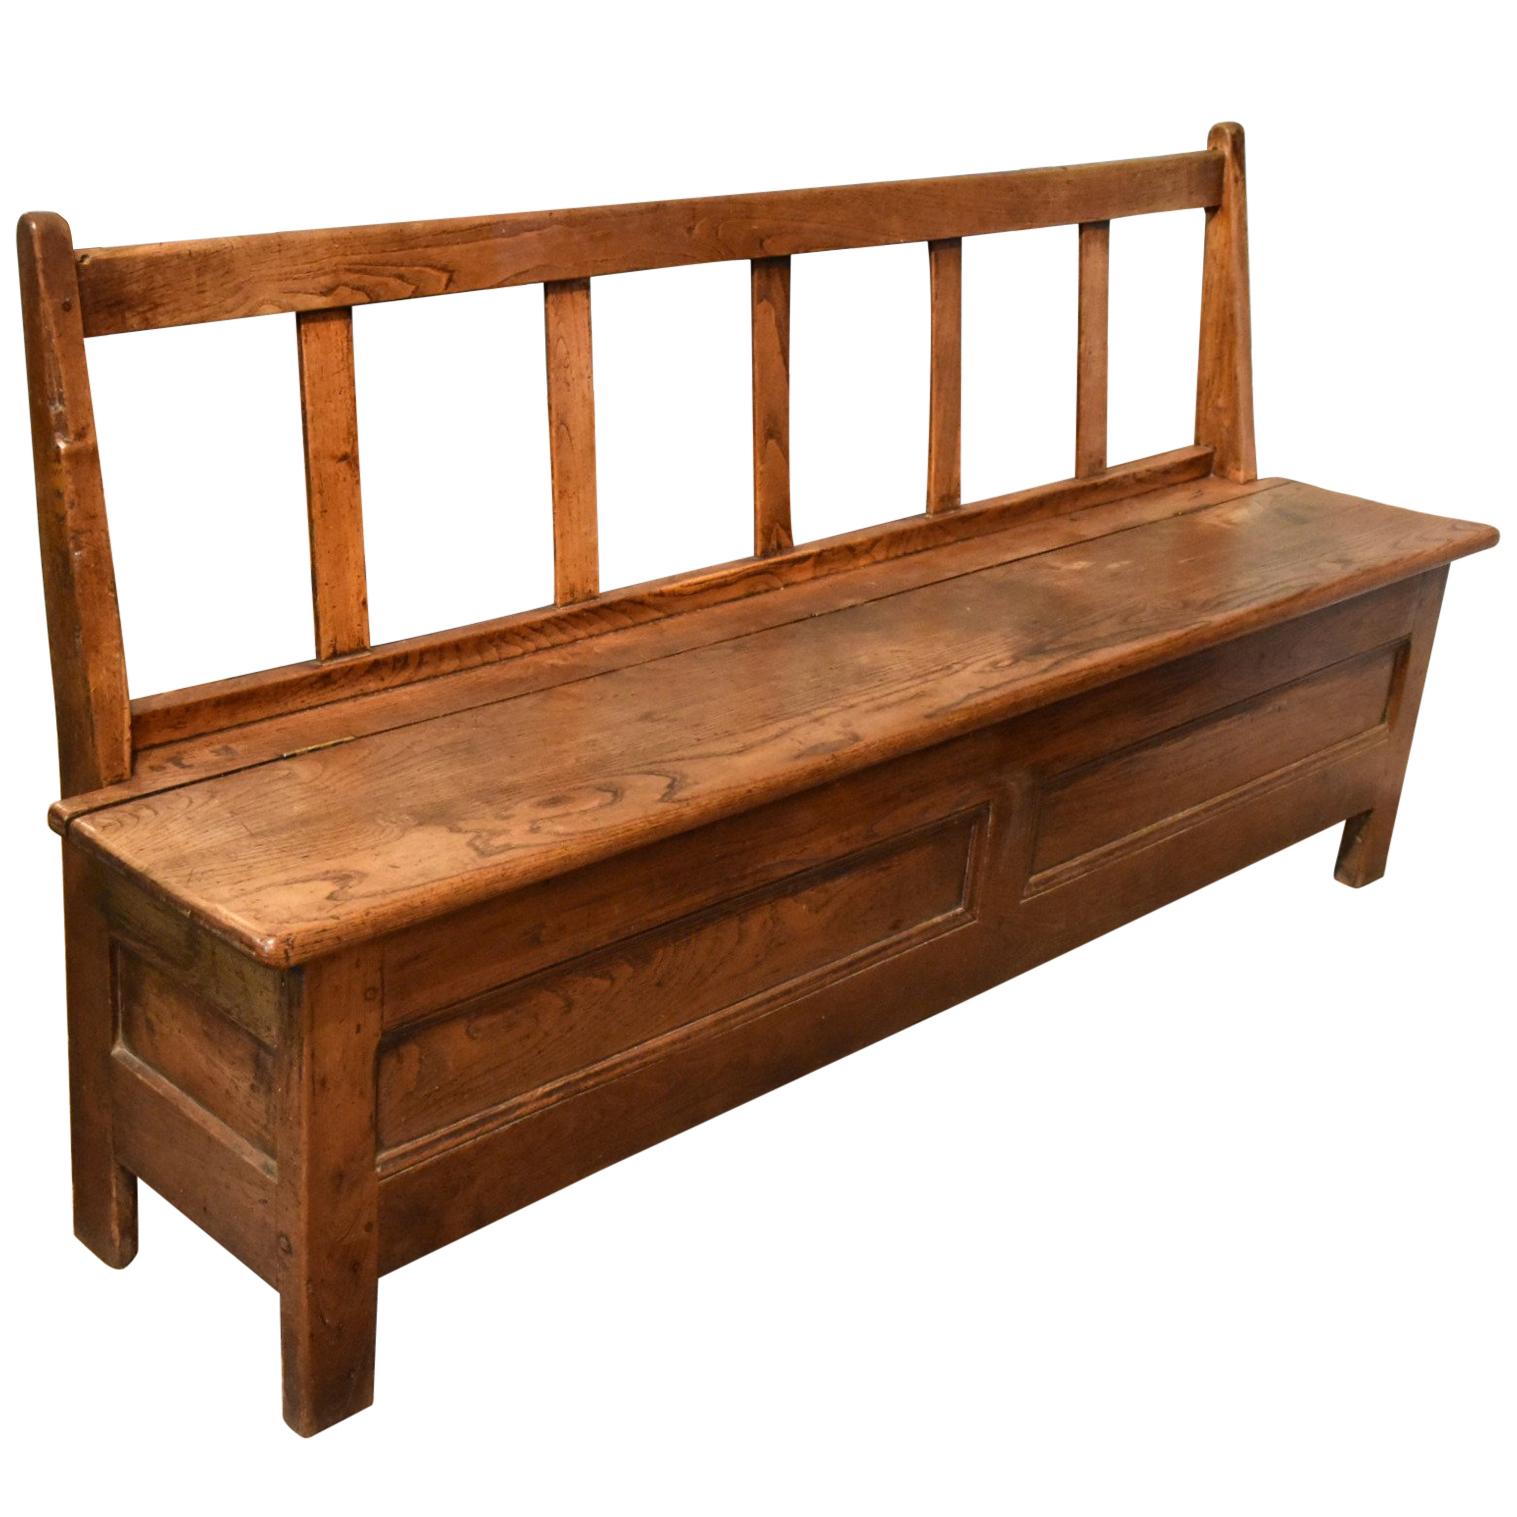 A Good Pair of Mid 19th Century French Breton Chestnut Benches For Sale